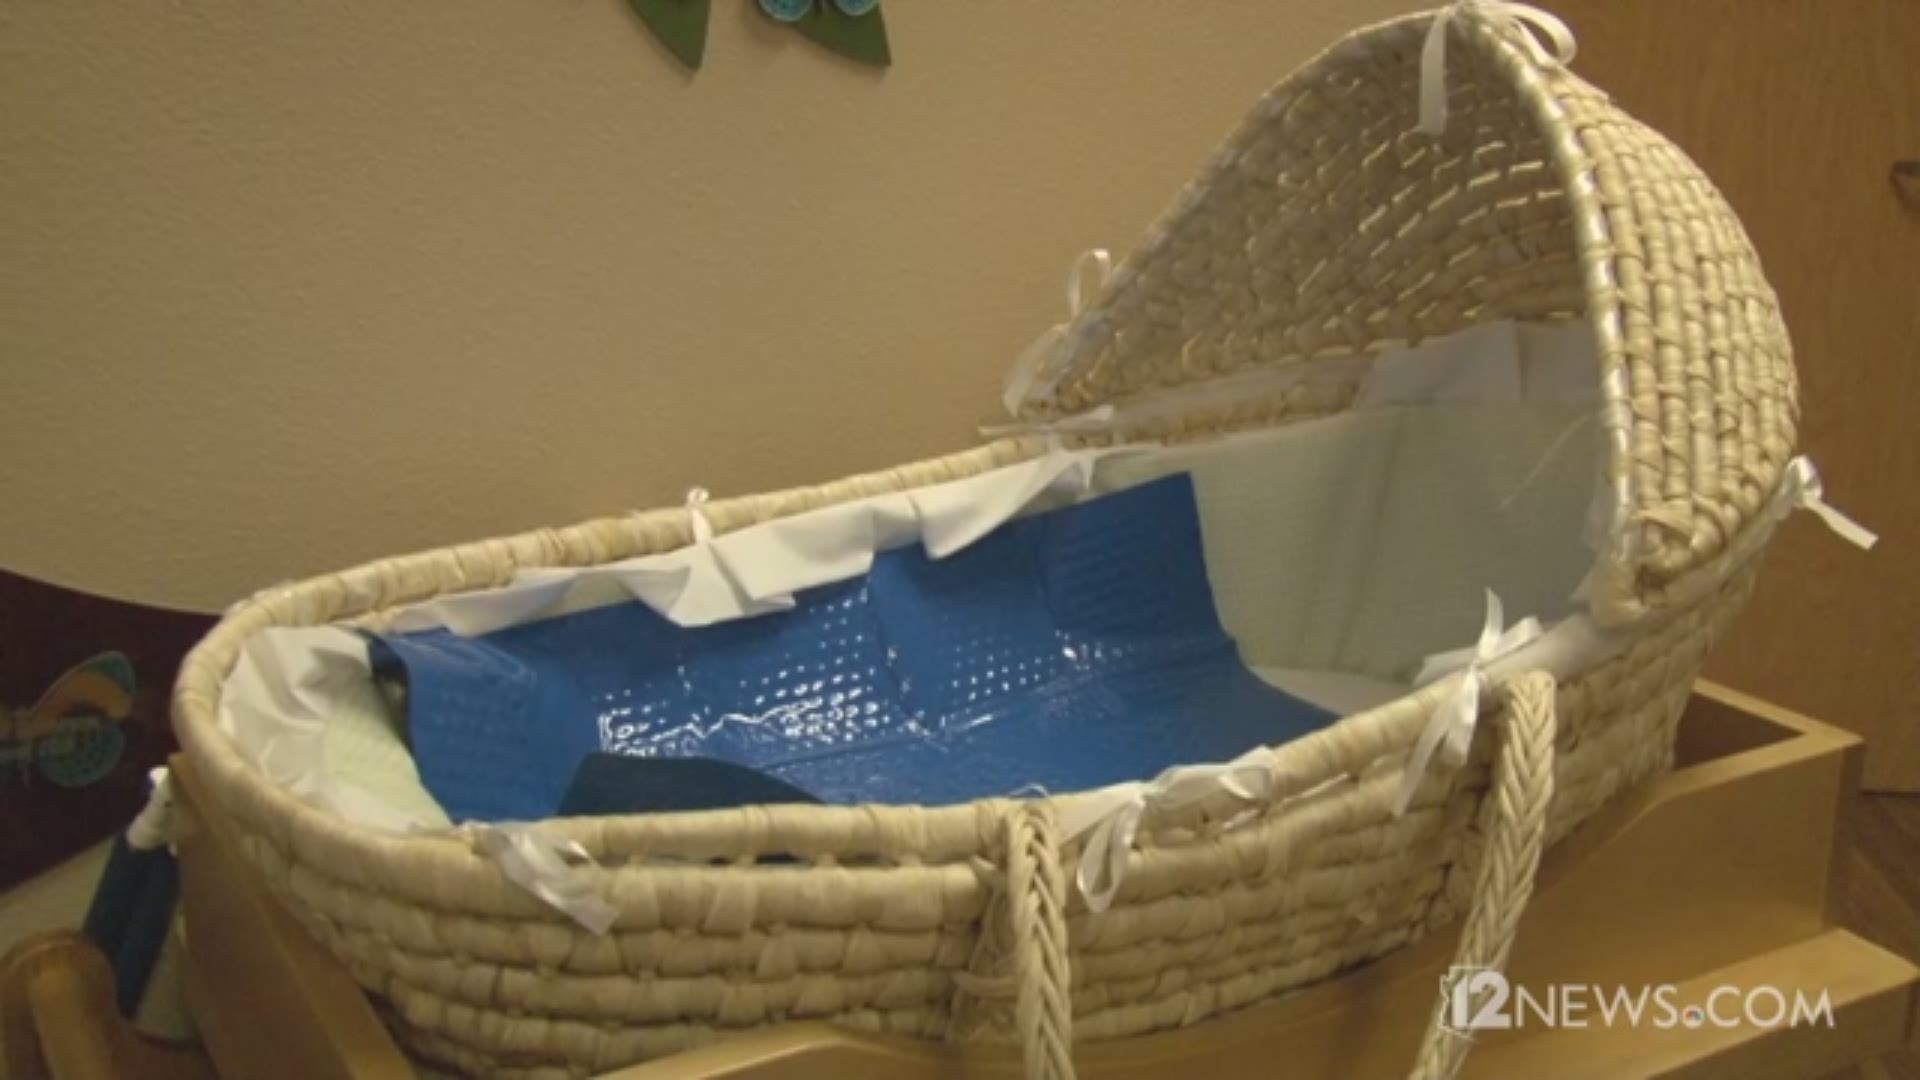 Phoenix mothers advocate for 'Cuddlecot' in hospitals for stillborn parents to grieve